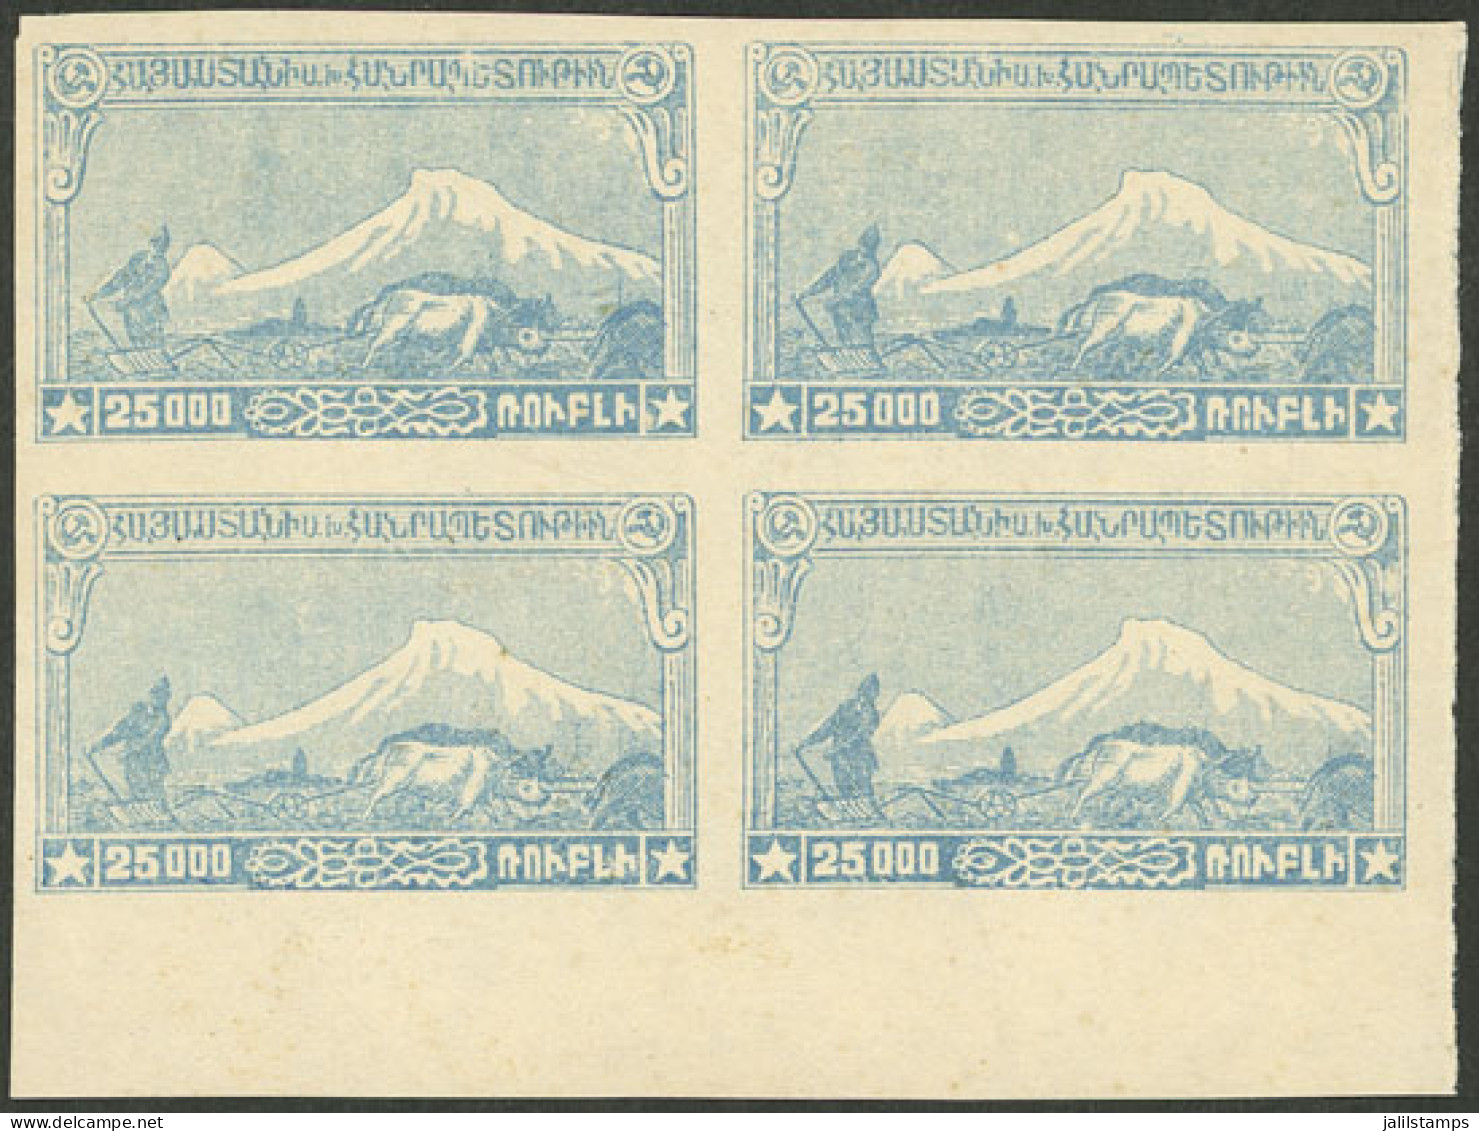 ARMENIA: Yvert 117, 1921 25,000r. Mount Ararat, COLOR PROOF, Imperforate Block Of 4 Printed In Light Blue, MNH, Excellen - Arménie